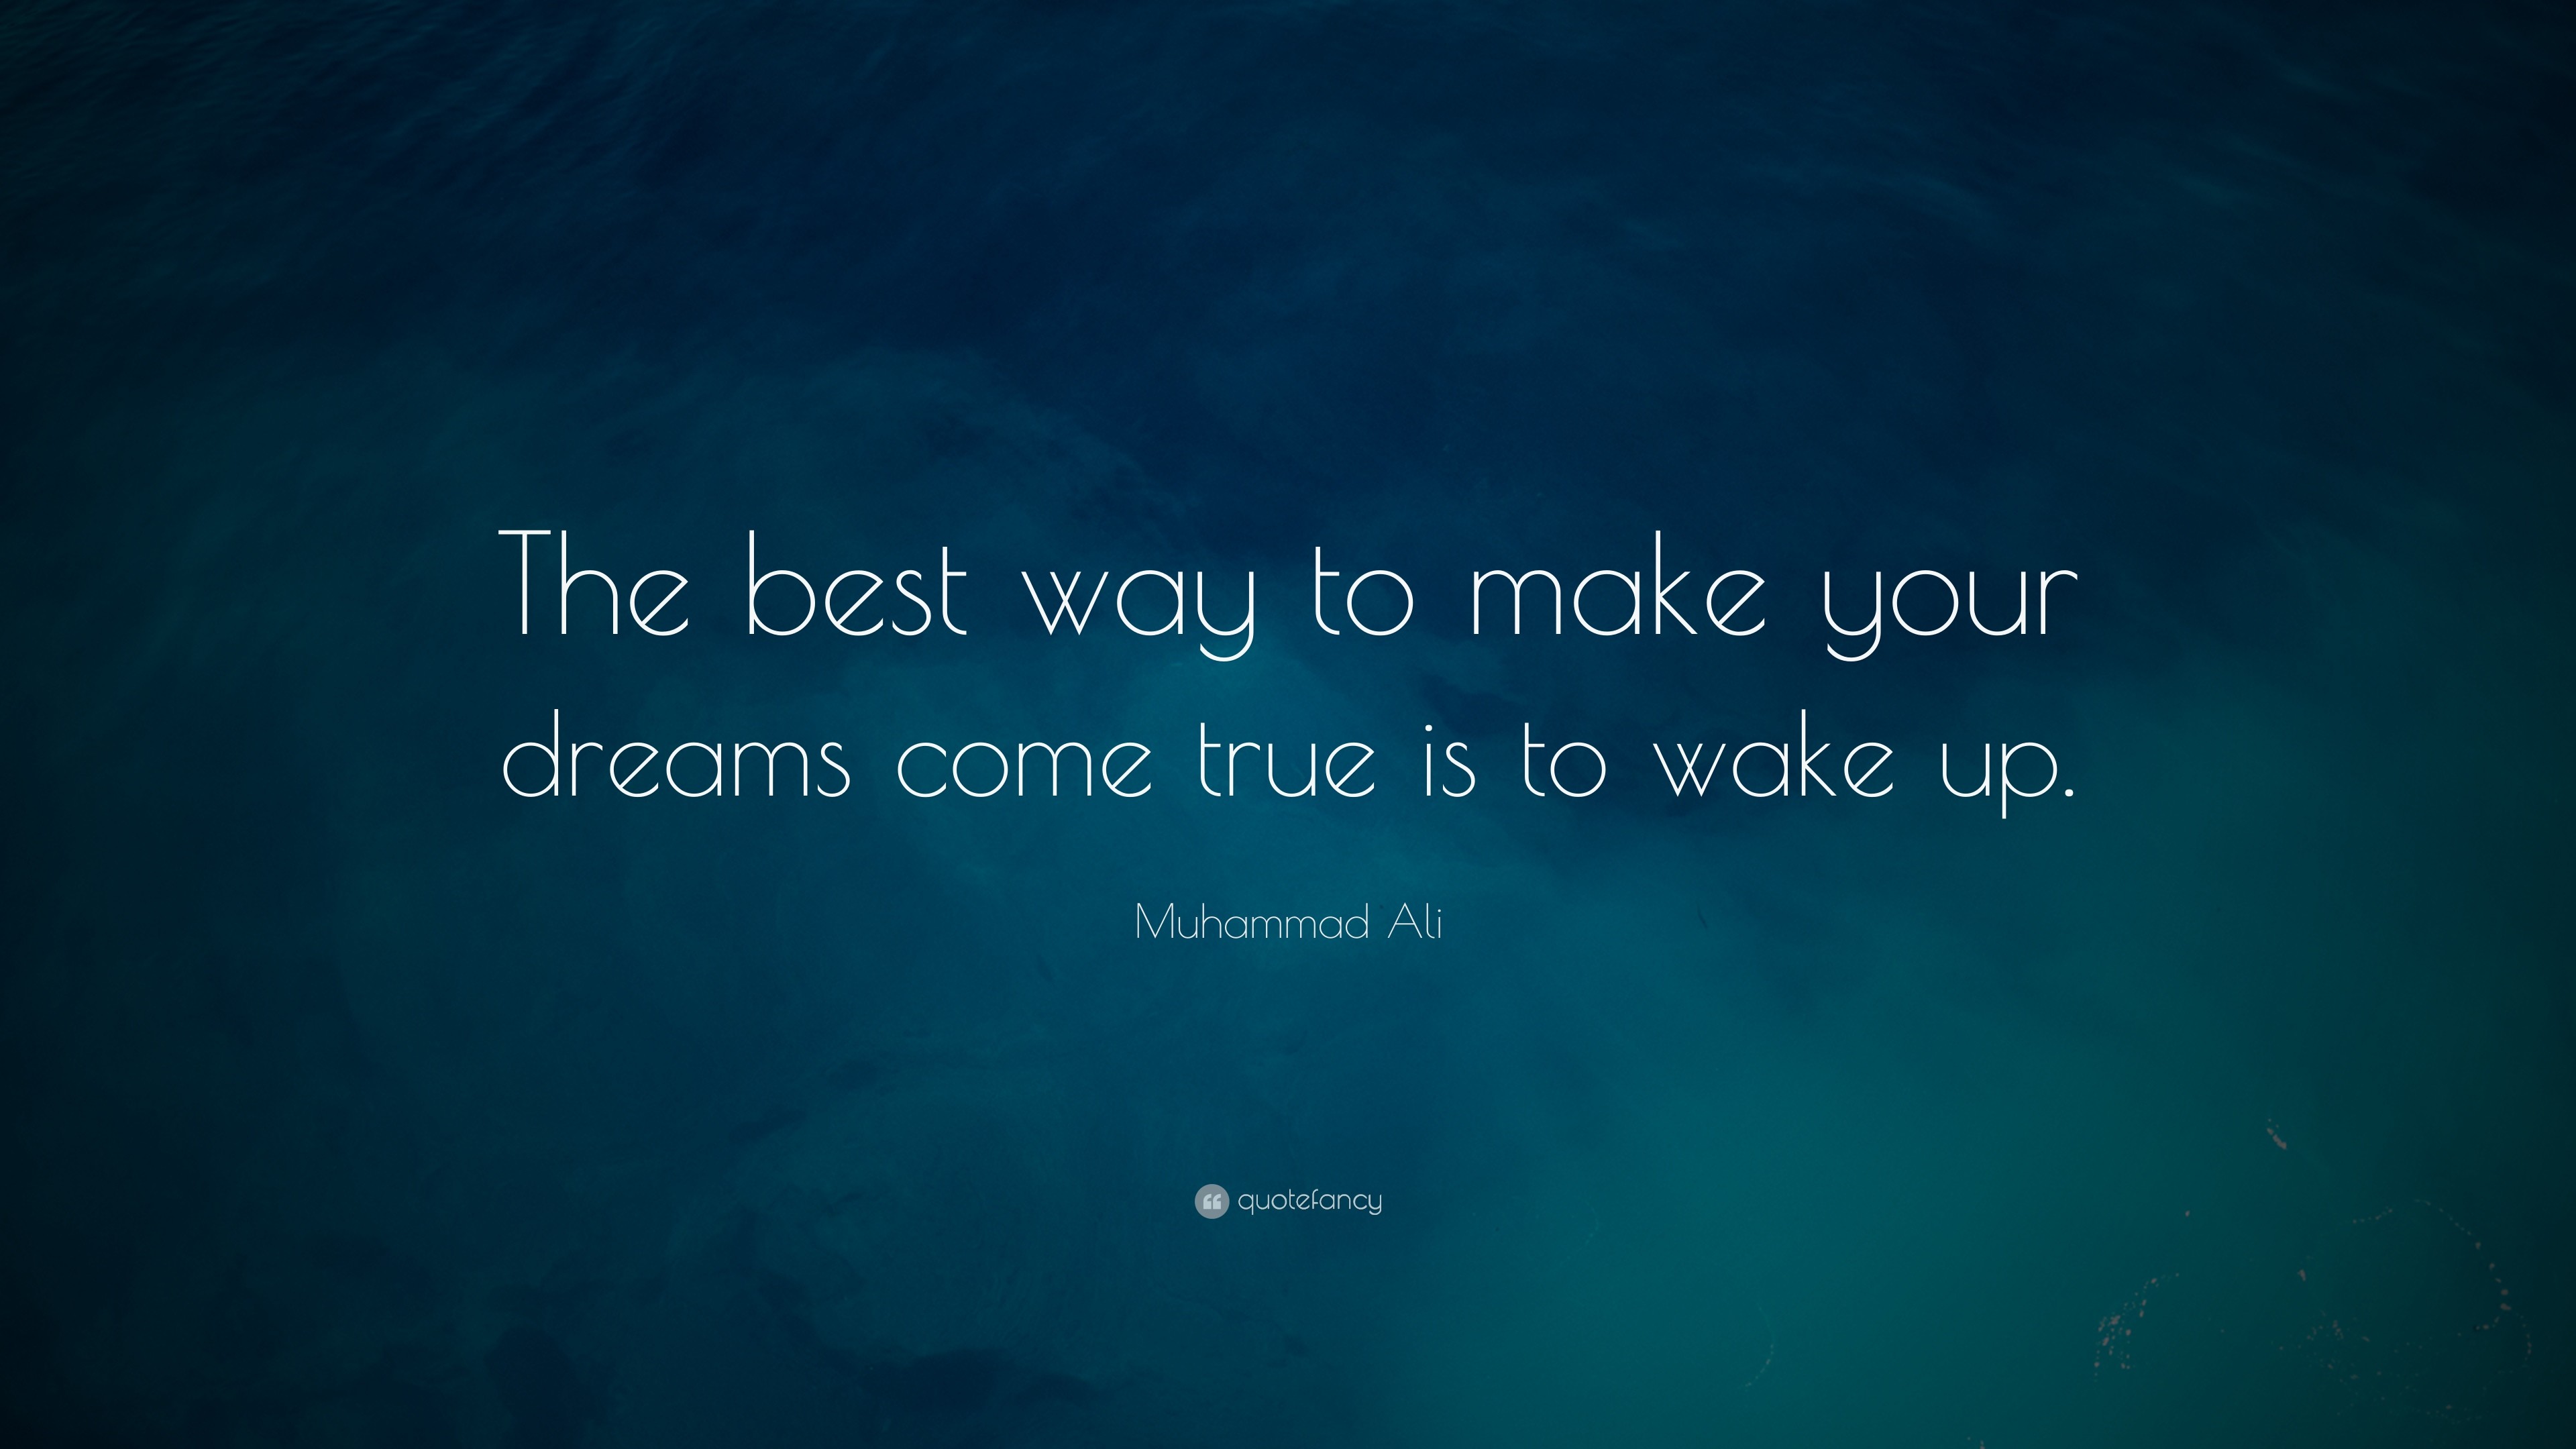 3840x2160 Muhammad Ali Quote: “The best way to make your dreams come true is to